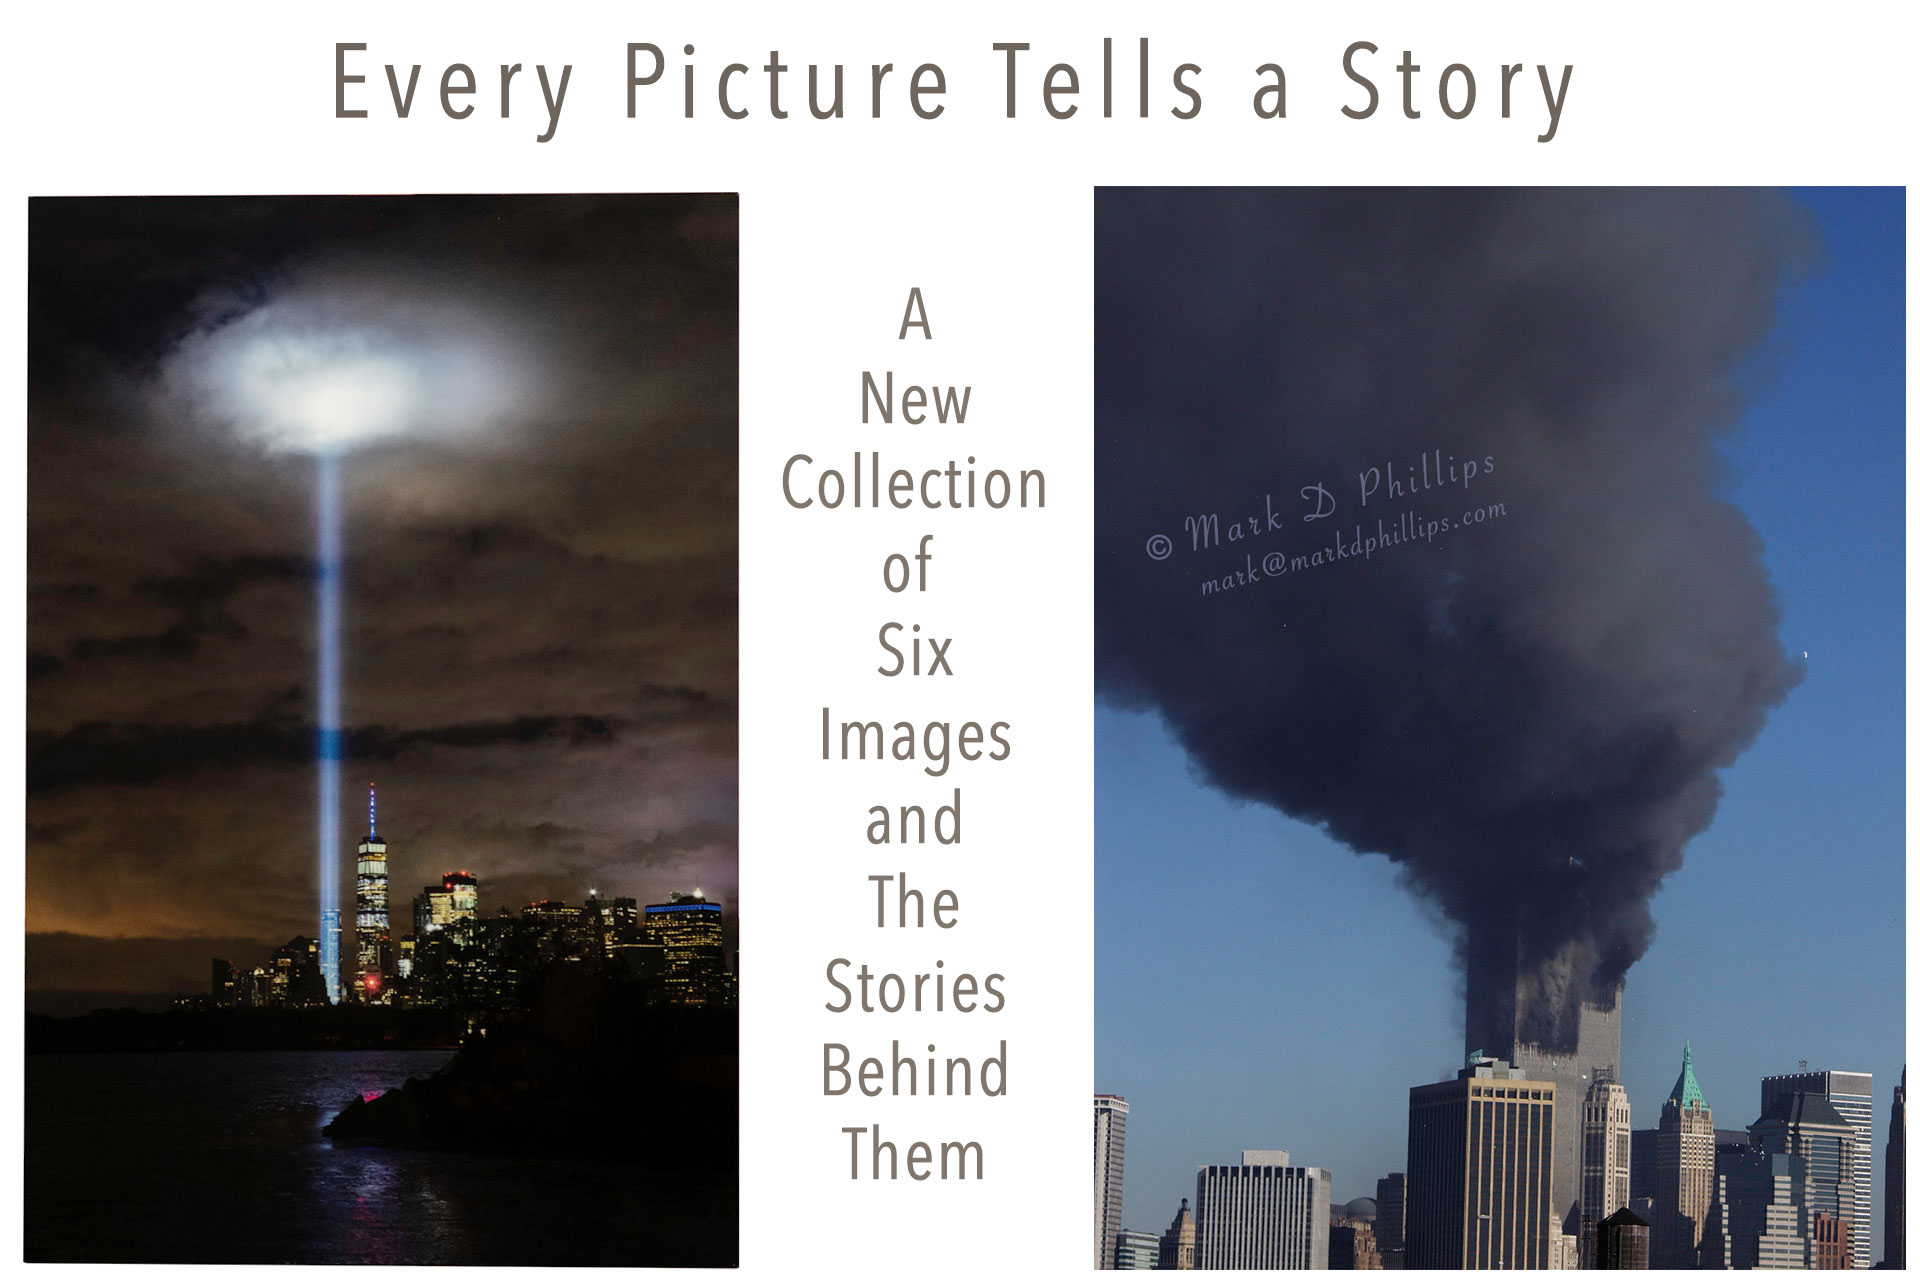 Image of the Tribute in Light from September 11, 2020, in the age of COVID-19 presented a feeling completely opposite of the one I captured on September 11, 2001.